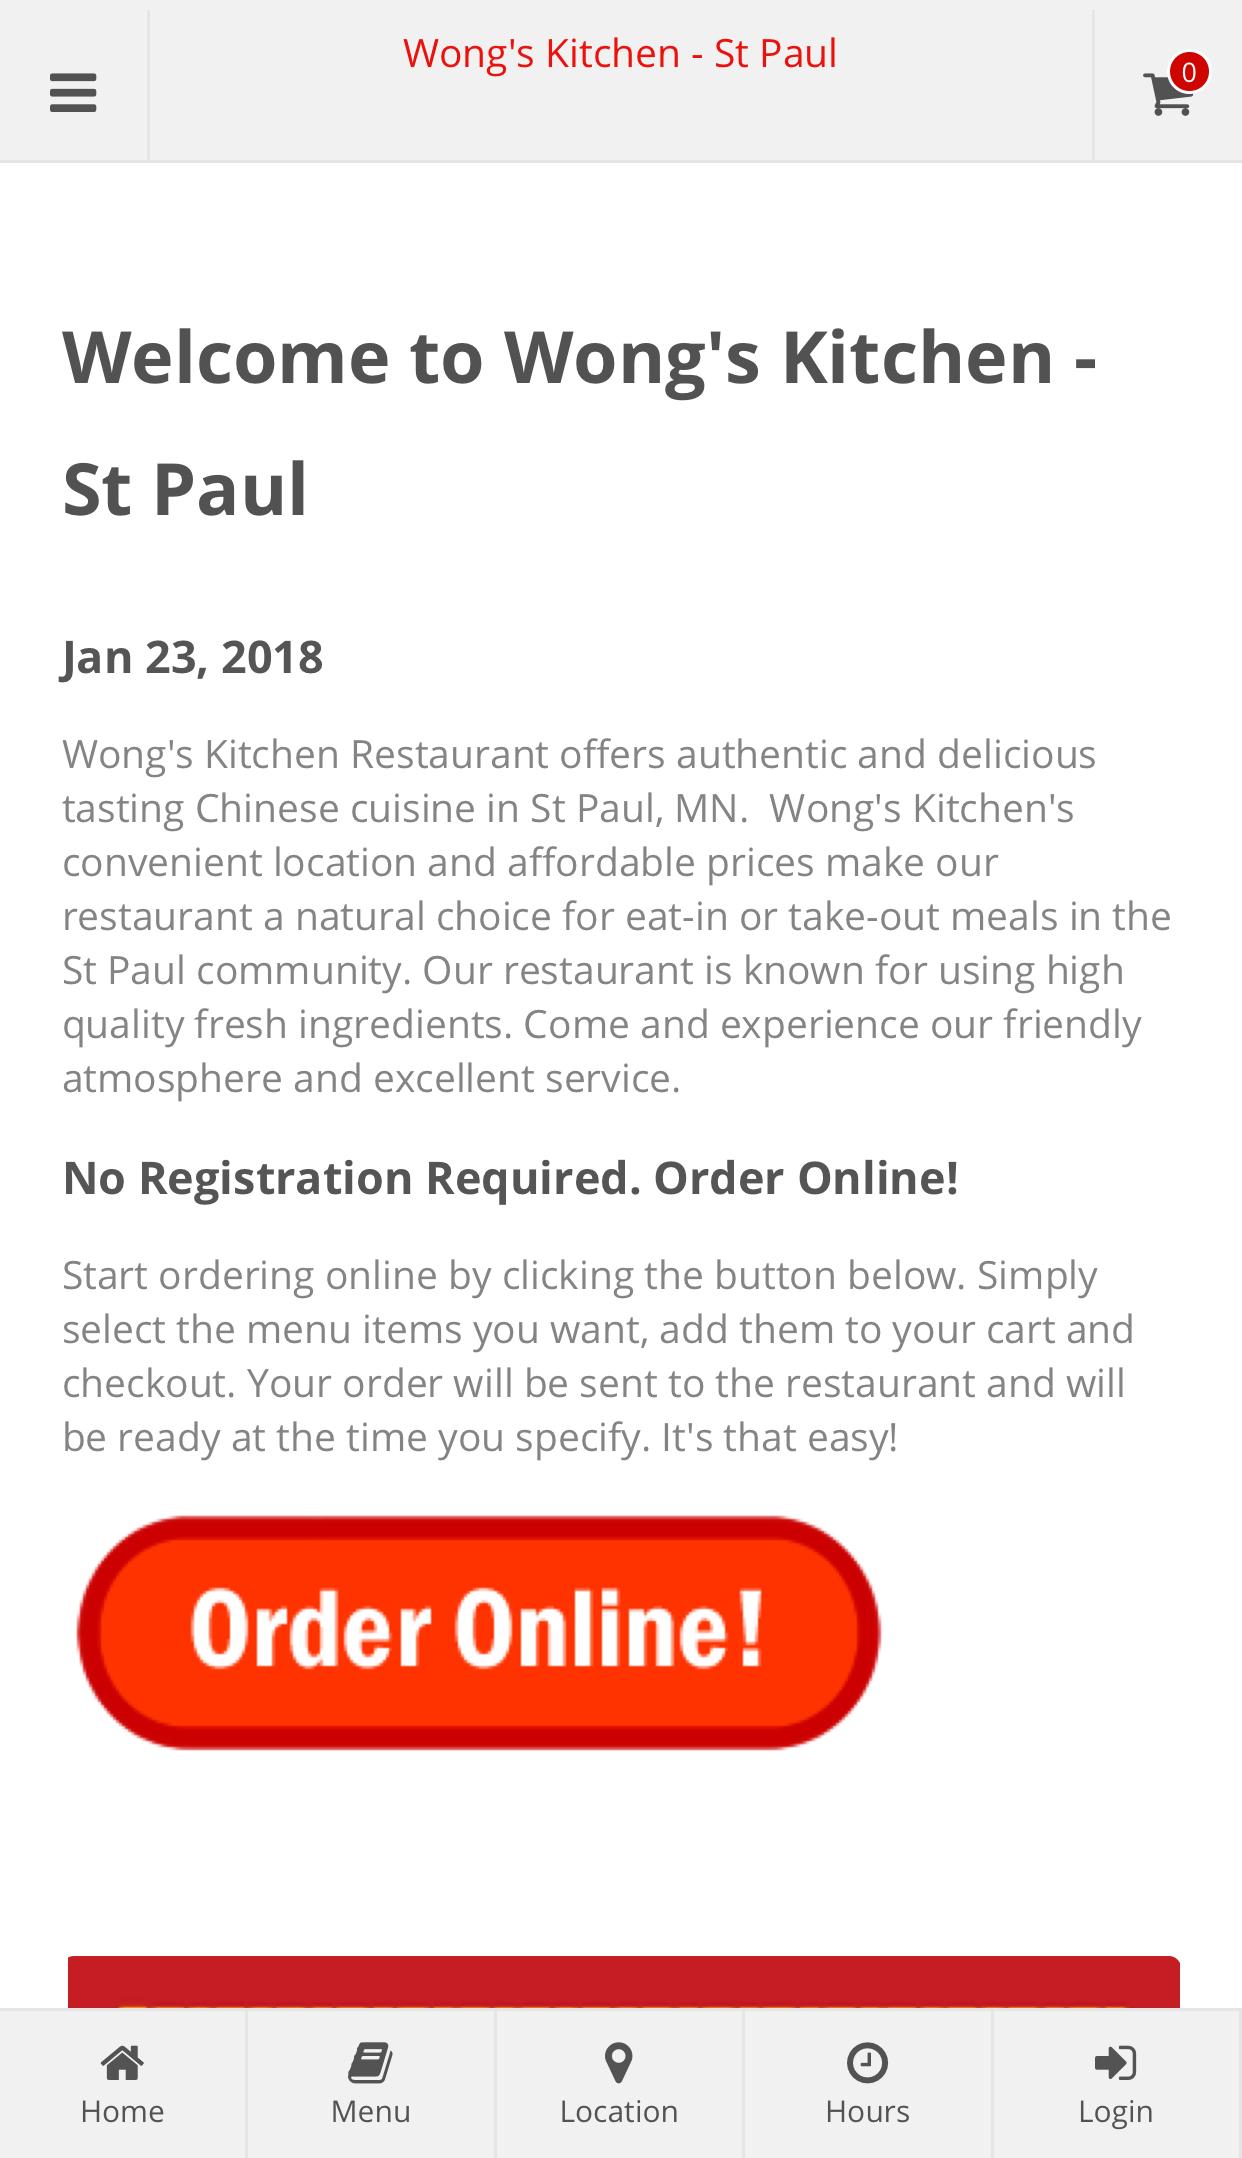 Wongs Kitchen St Paul Online Ordering For Android APK Download